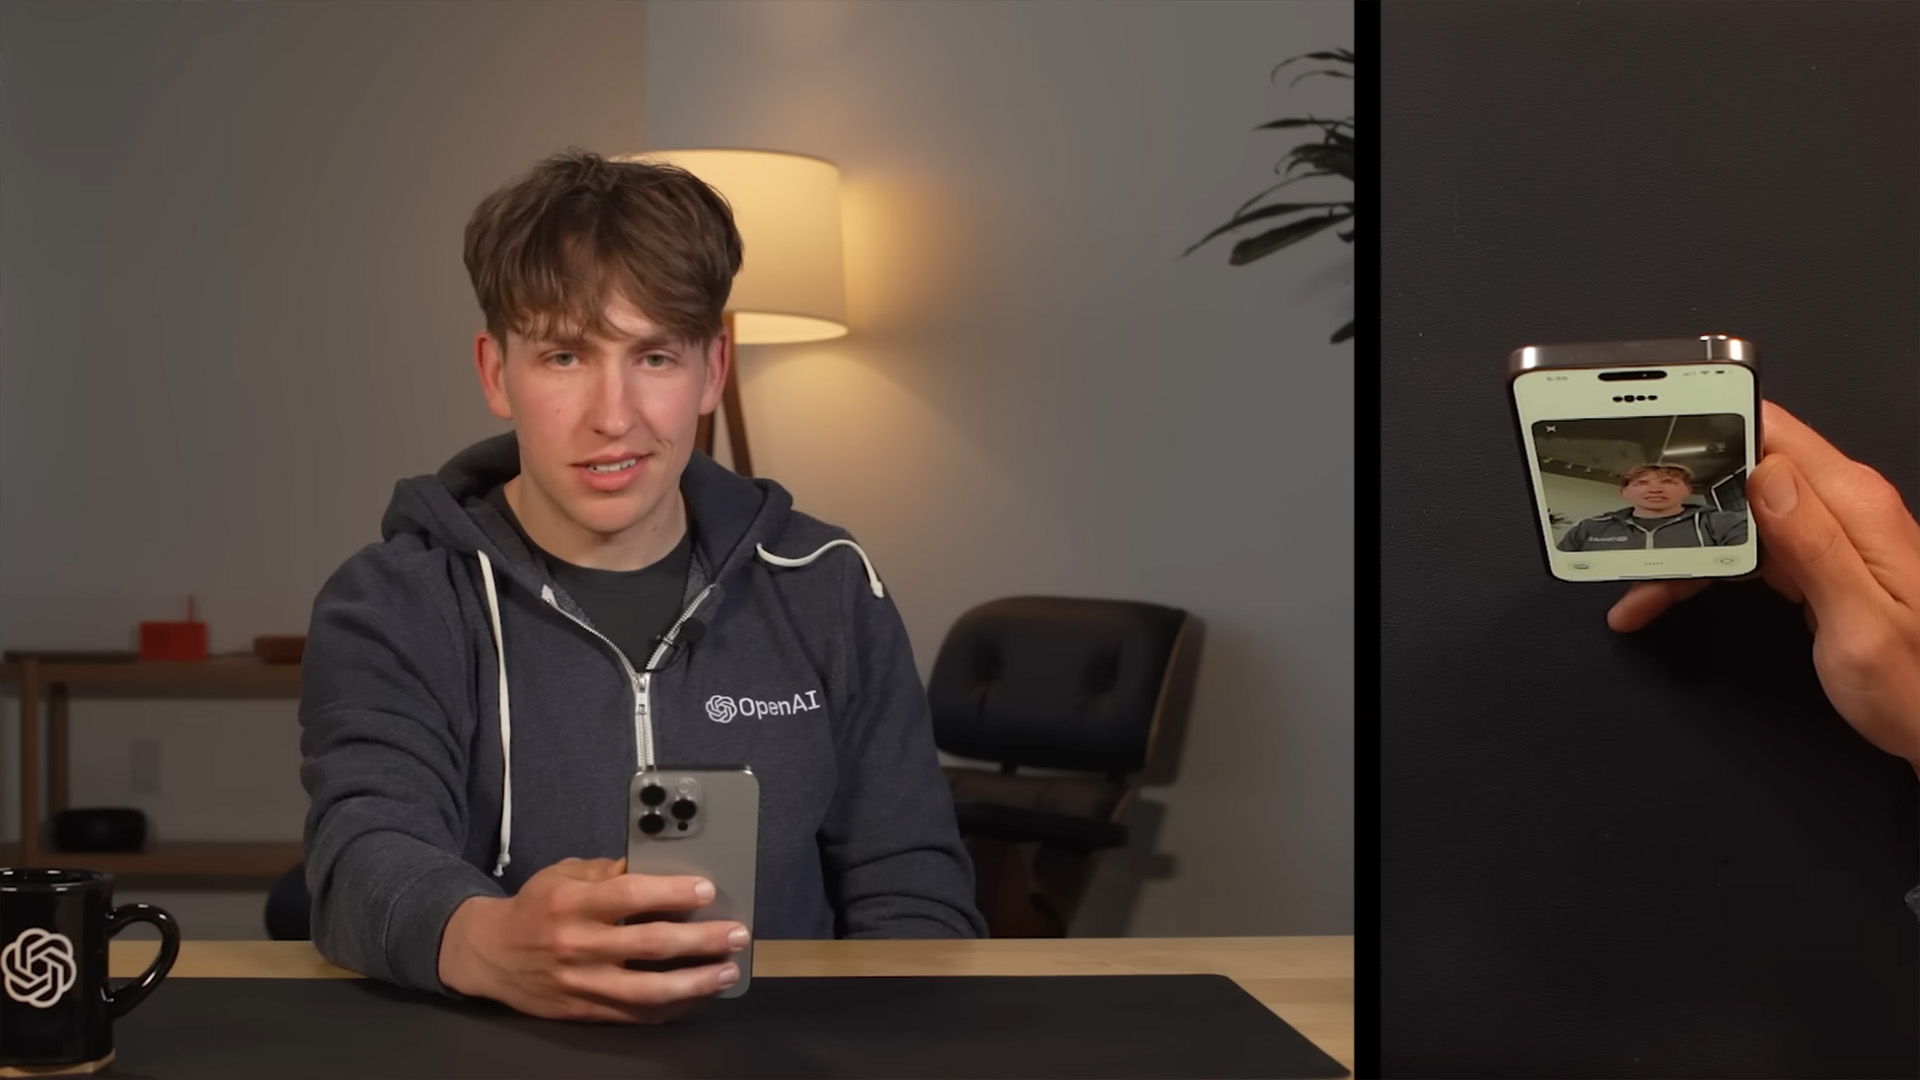  OpenAI unveils GPT-4o with a video of a man making small talk with his phone and I cannot pretend it's not really weird 